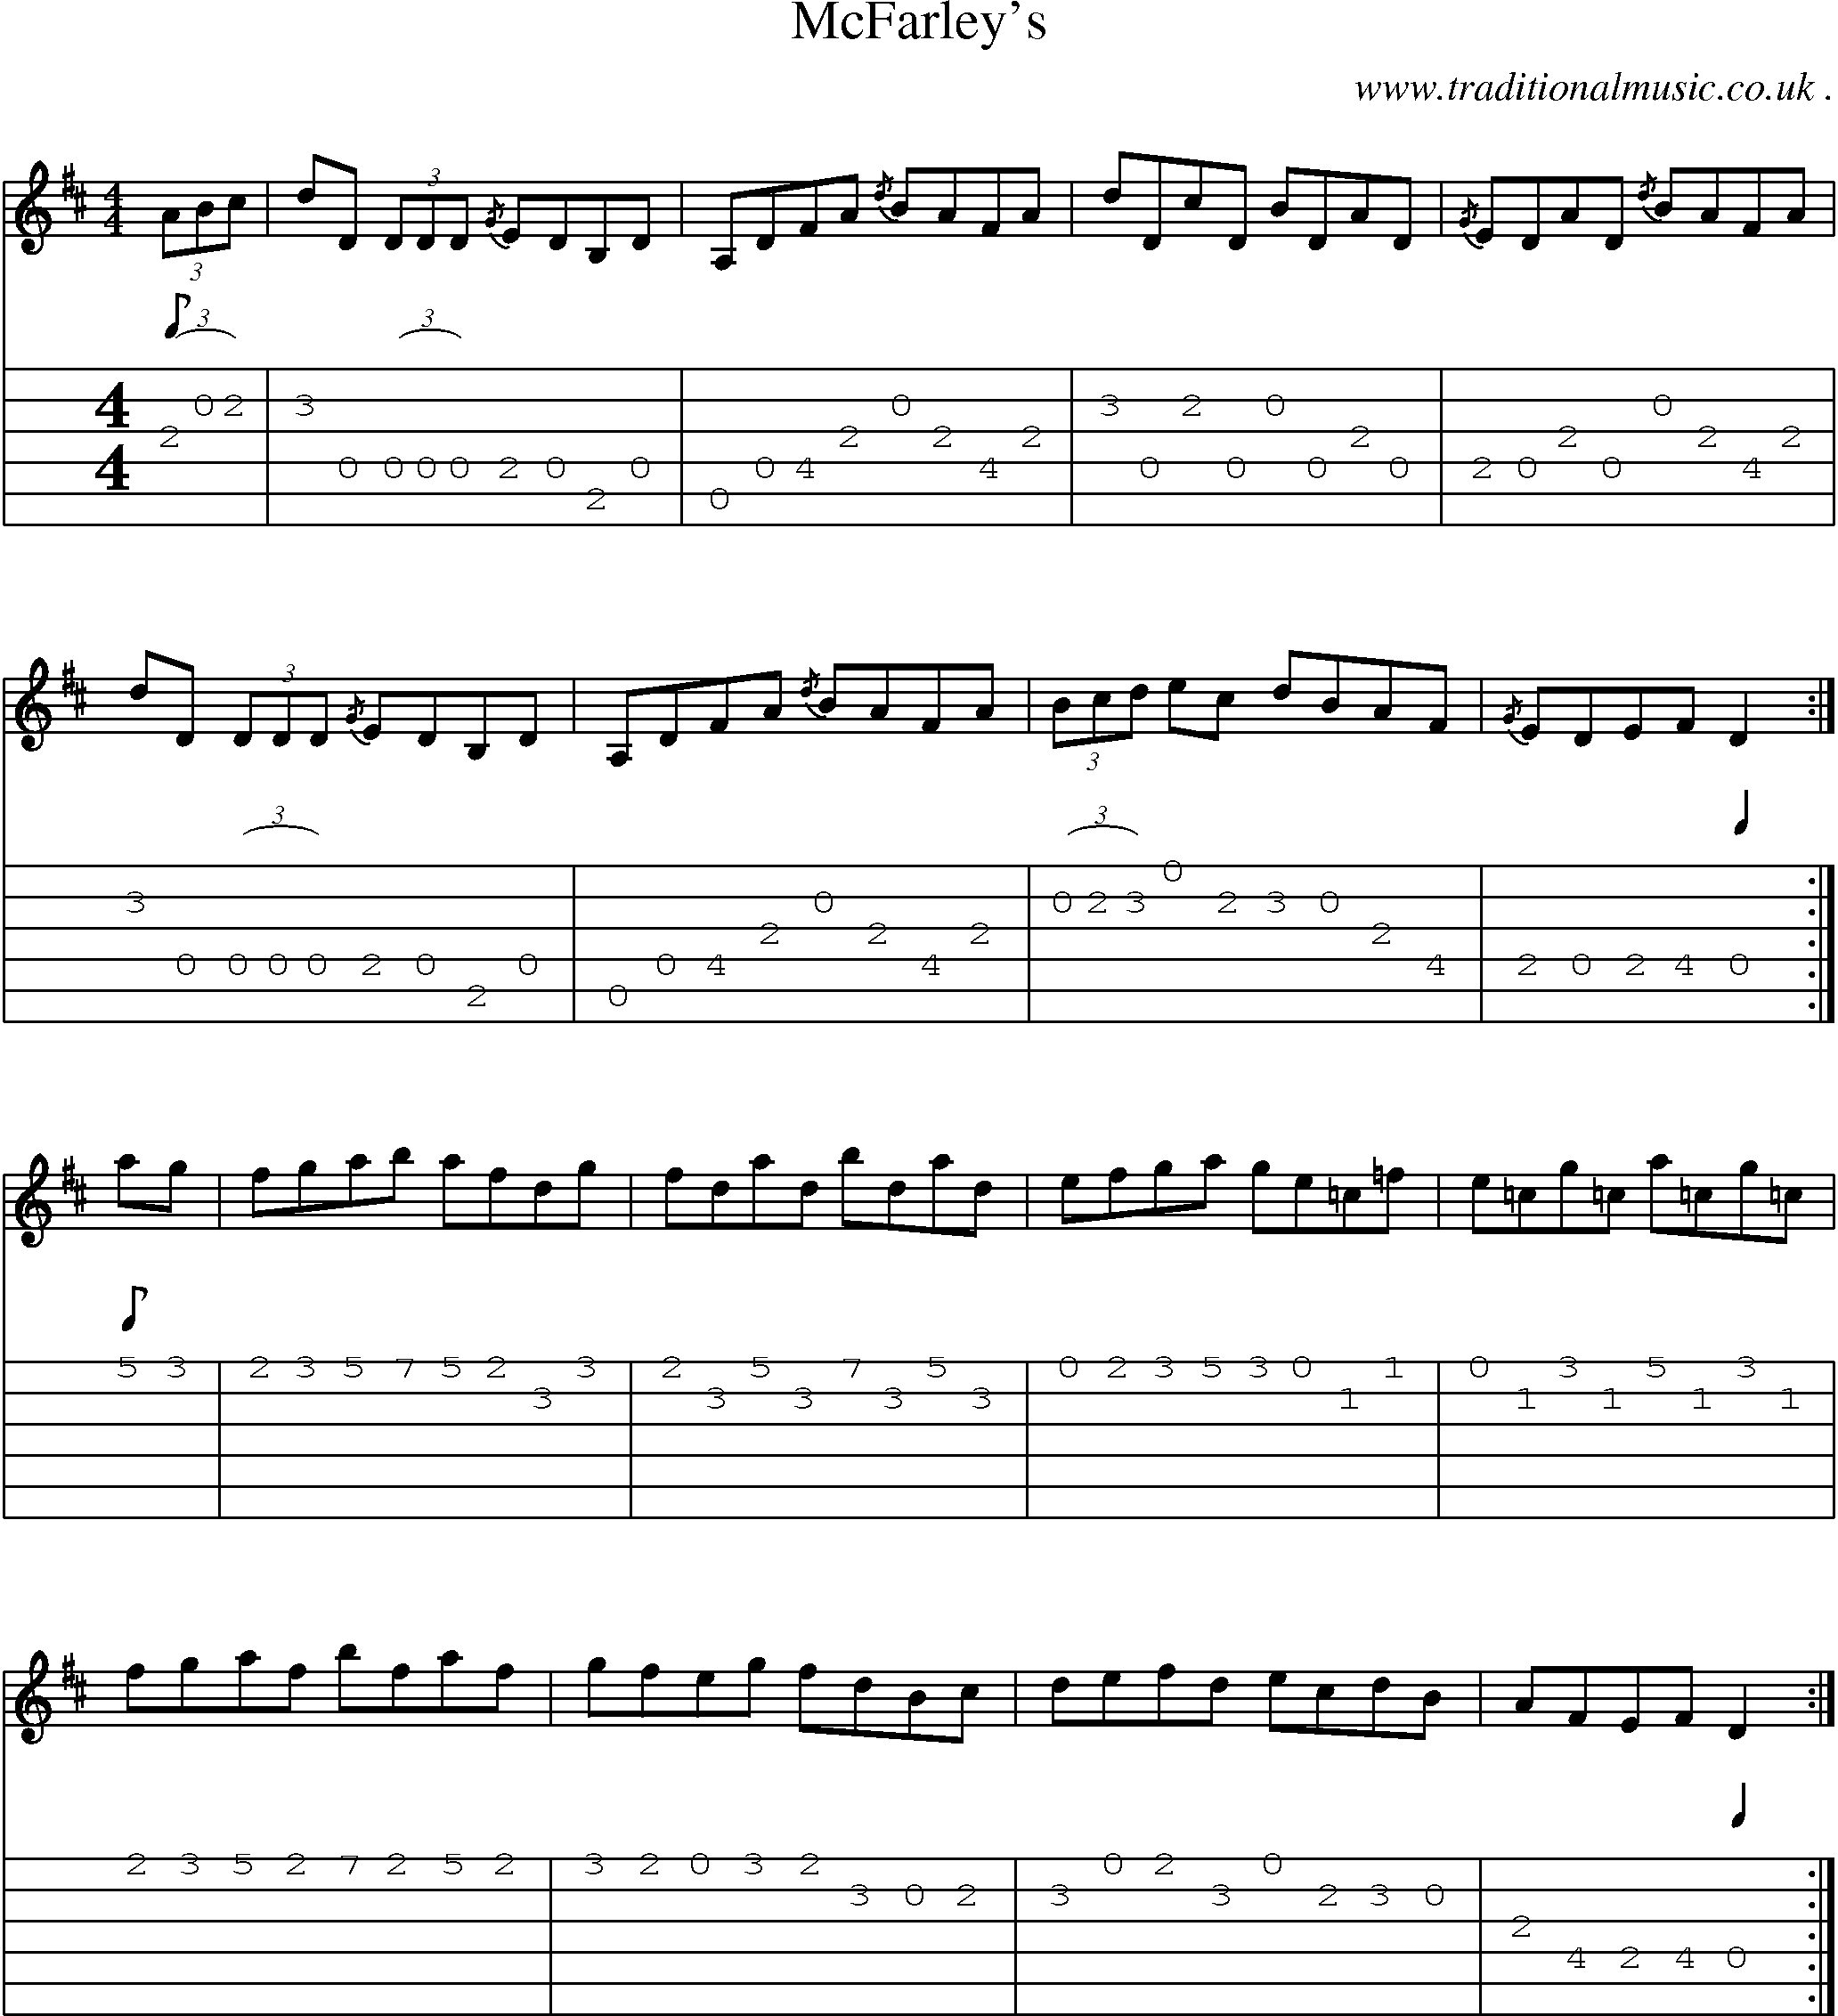 Sheet-music  score, Chords and Guitar Tabs for Mcfarleys